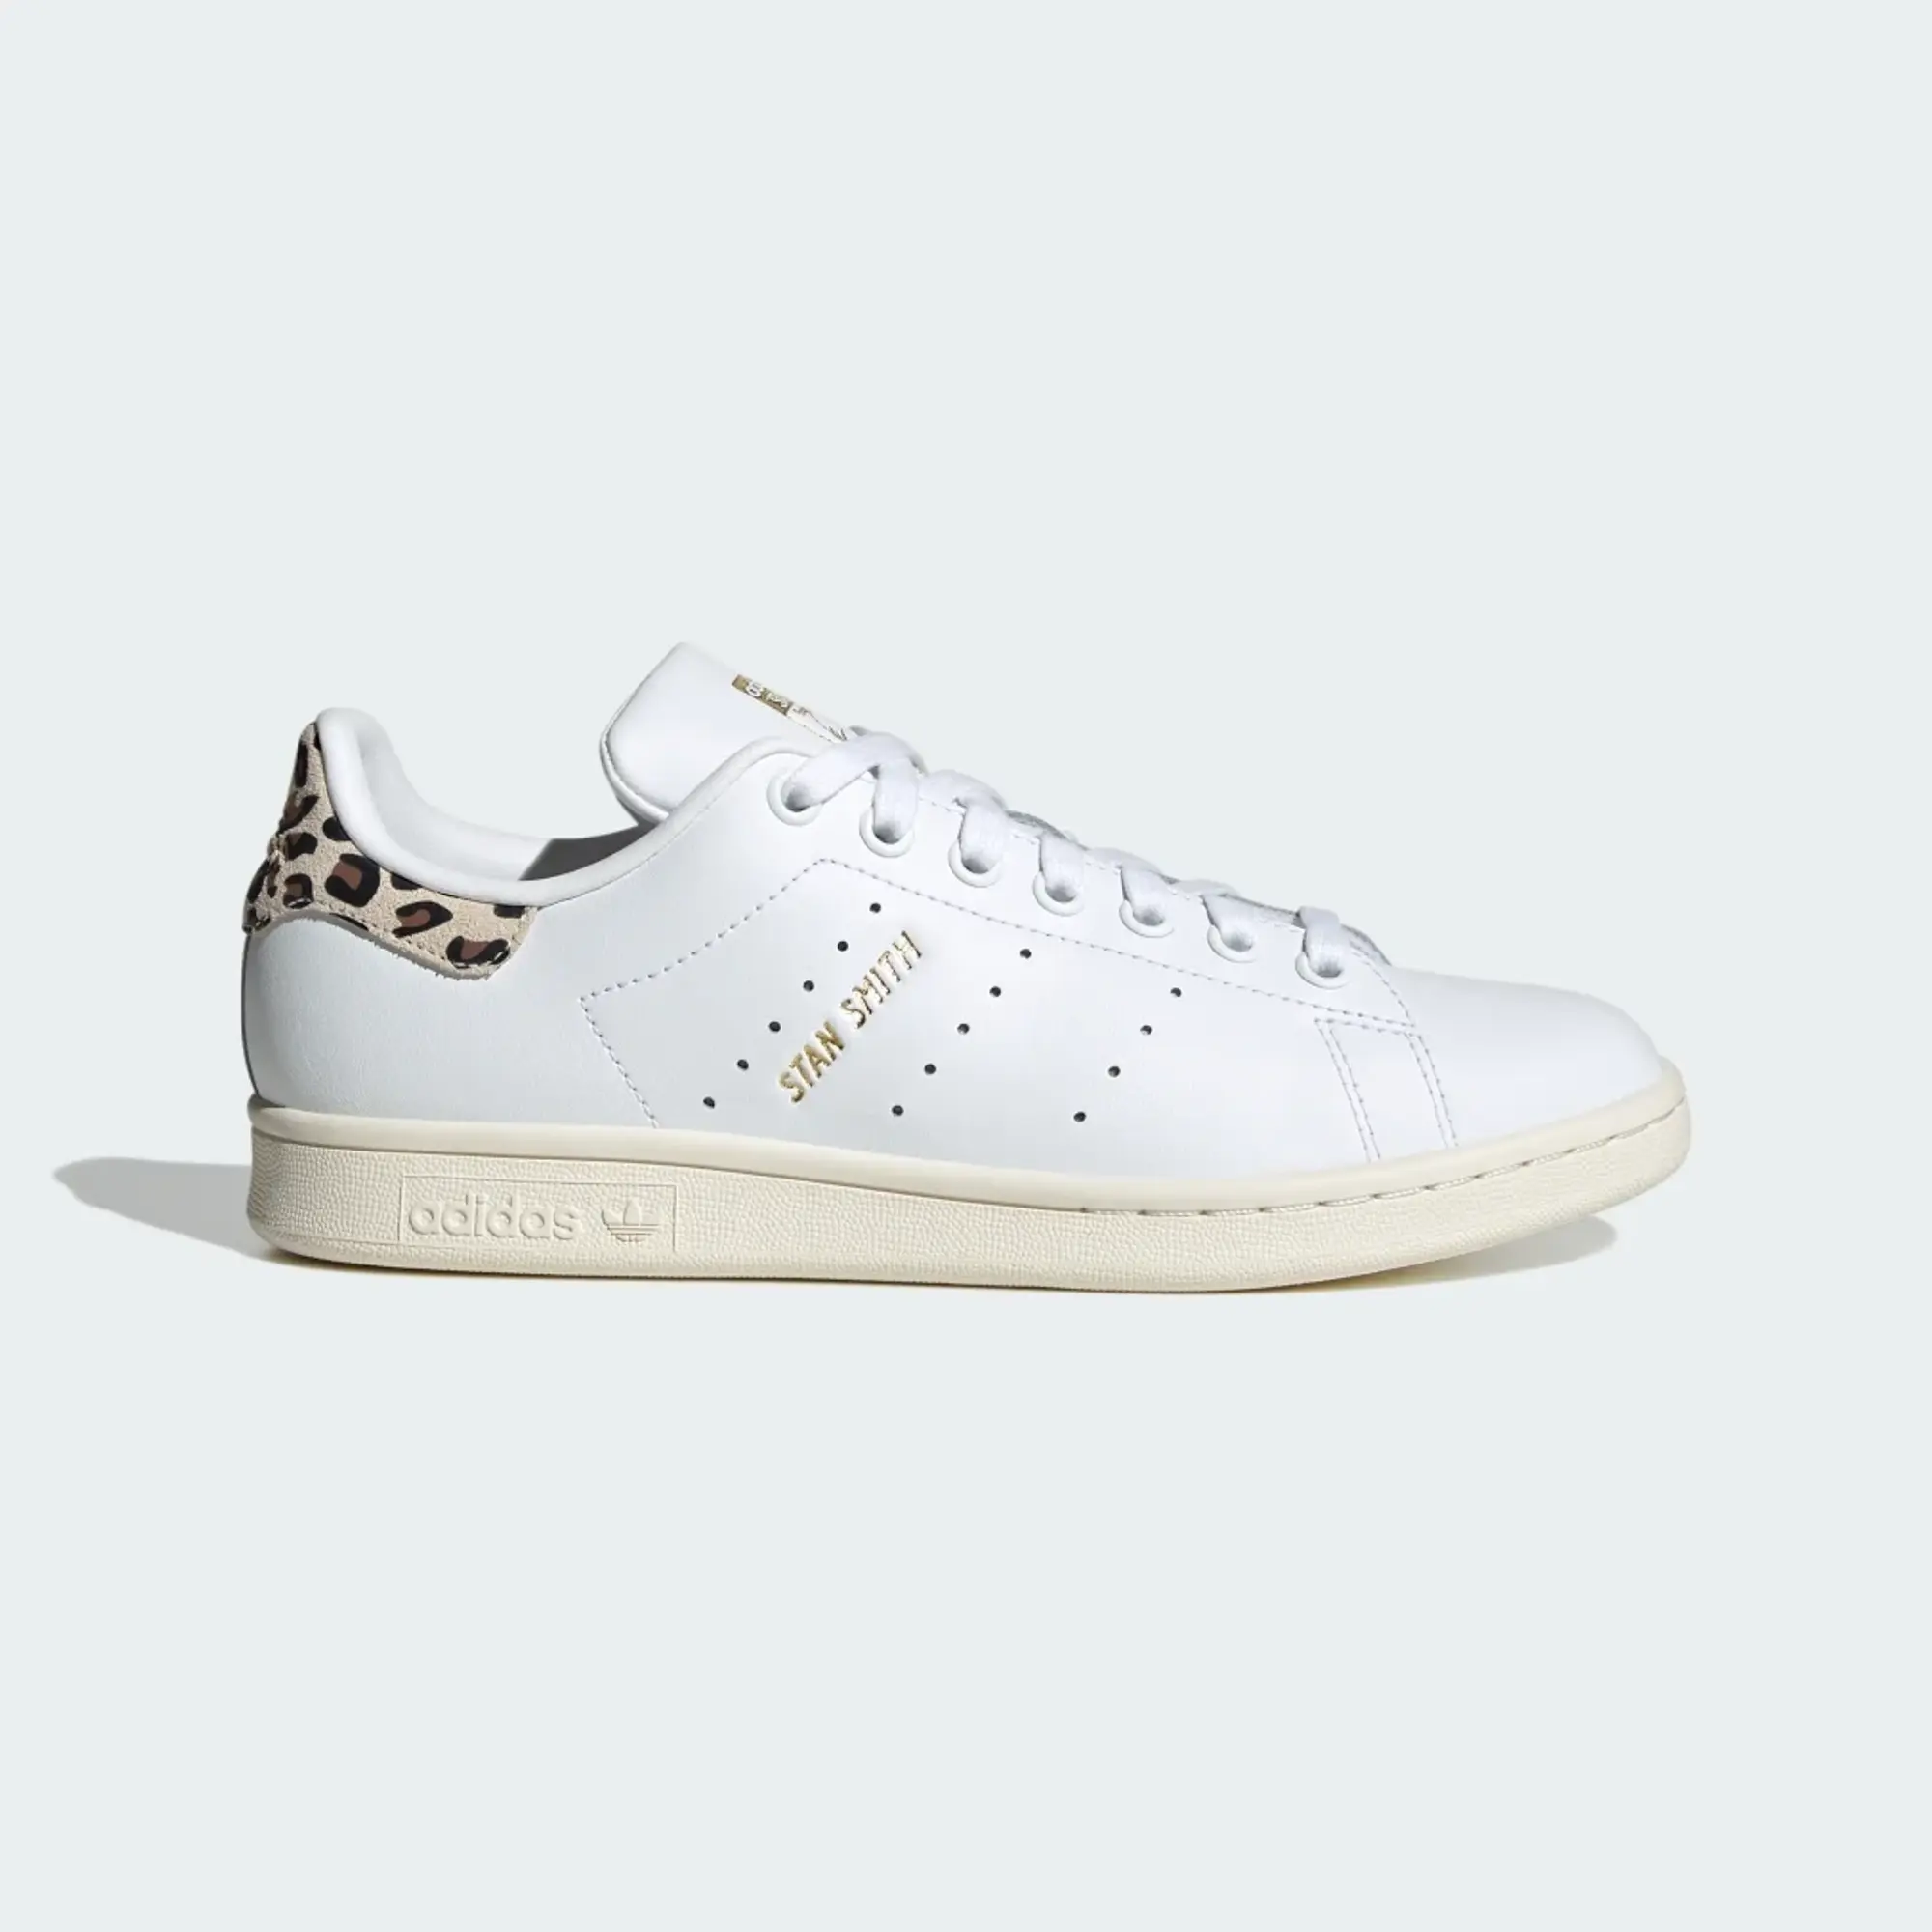 Adidas Originals Stan Smith Trainers In White And Leopard